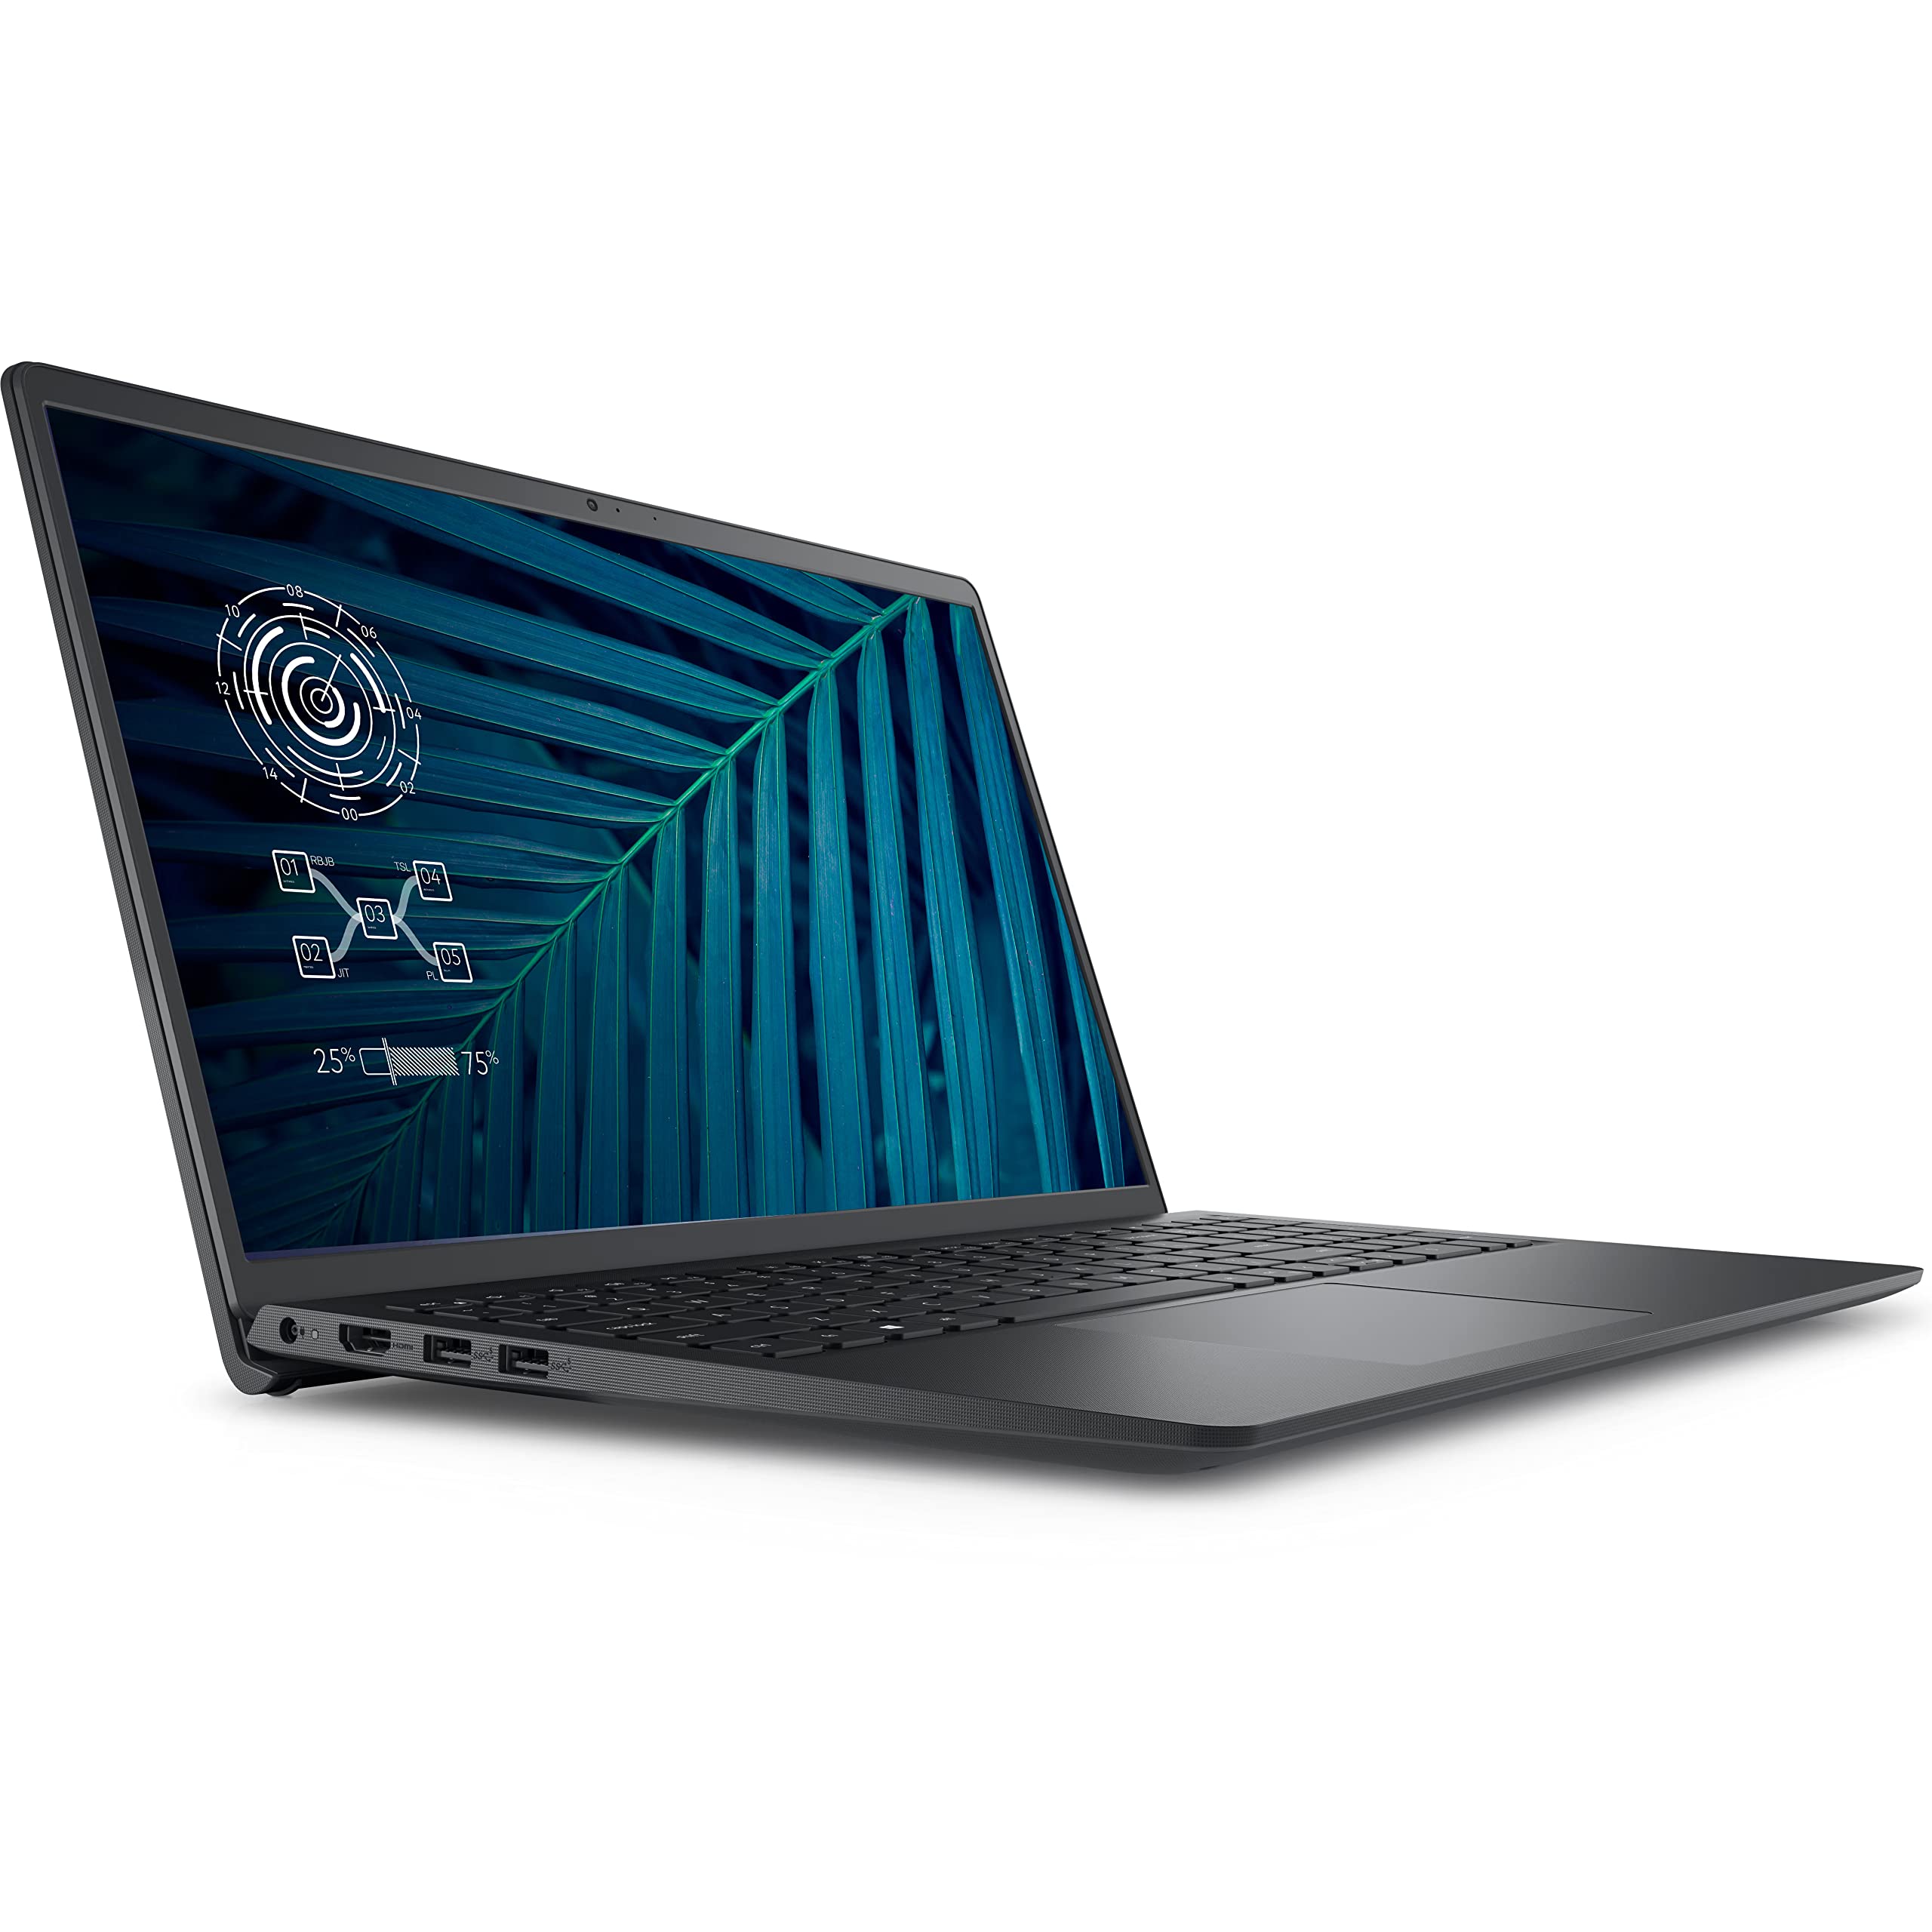 Dell Vostro 3510 15.6" FHD Business Laptop Computer, Intel Quad-Core i7-1165G7 up to 4.7GHz, 16GB DDR4 RAM, 512GB PCIe SSD, 802.11AC WiFi, Bluetooth, Carbon Black, Windows 11 Professional